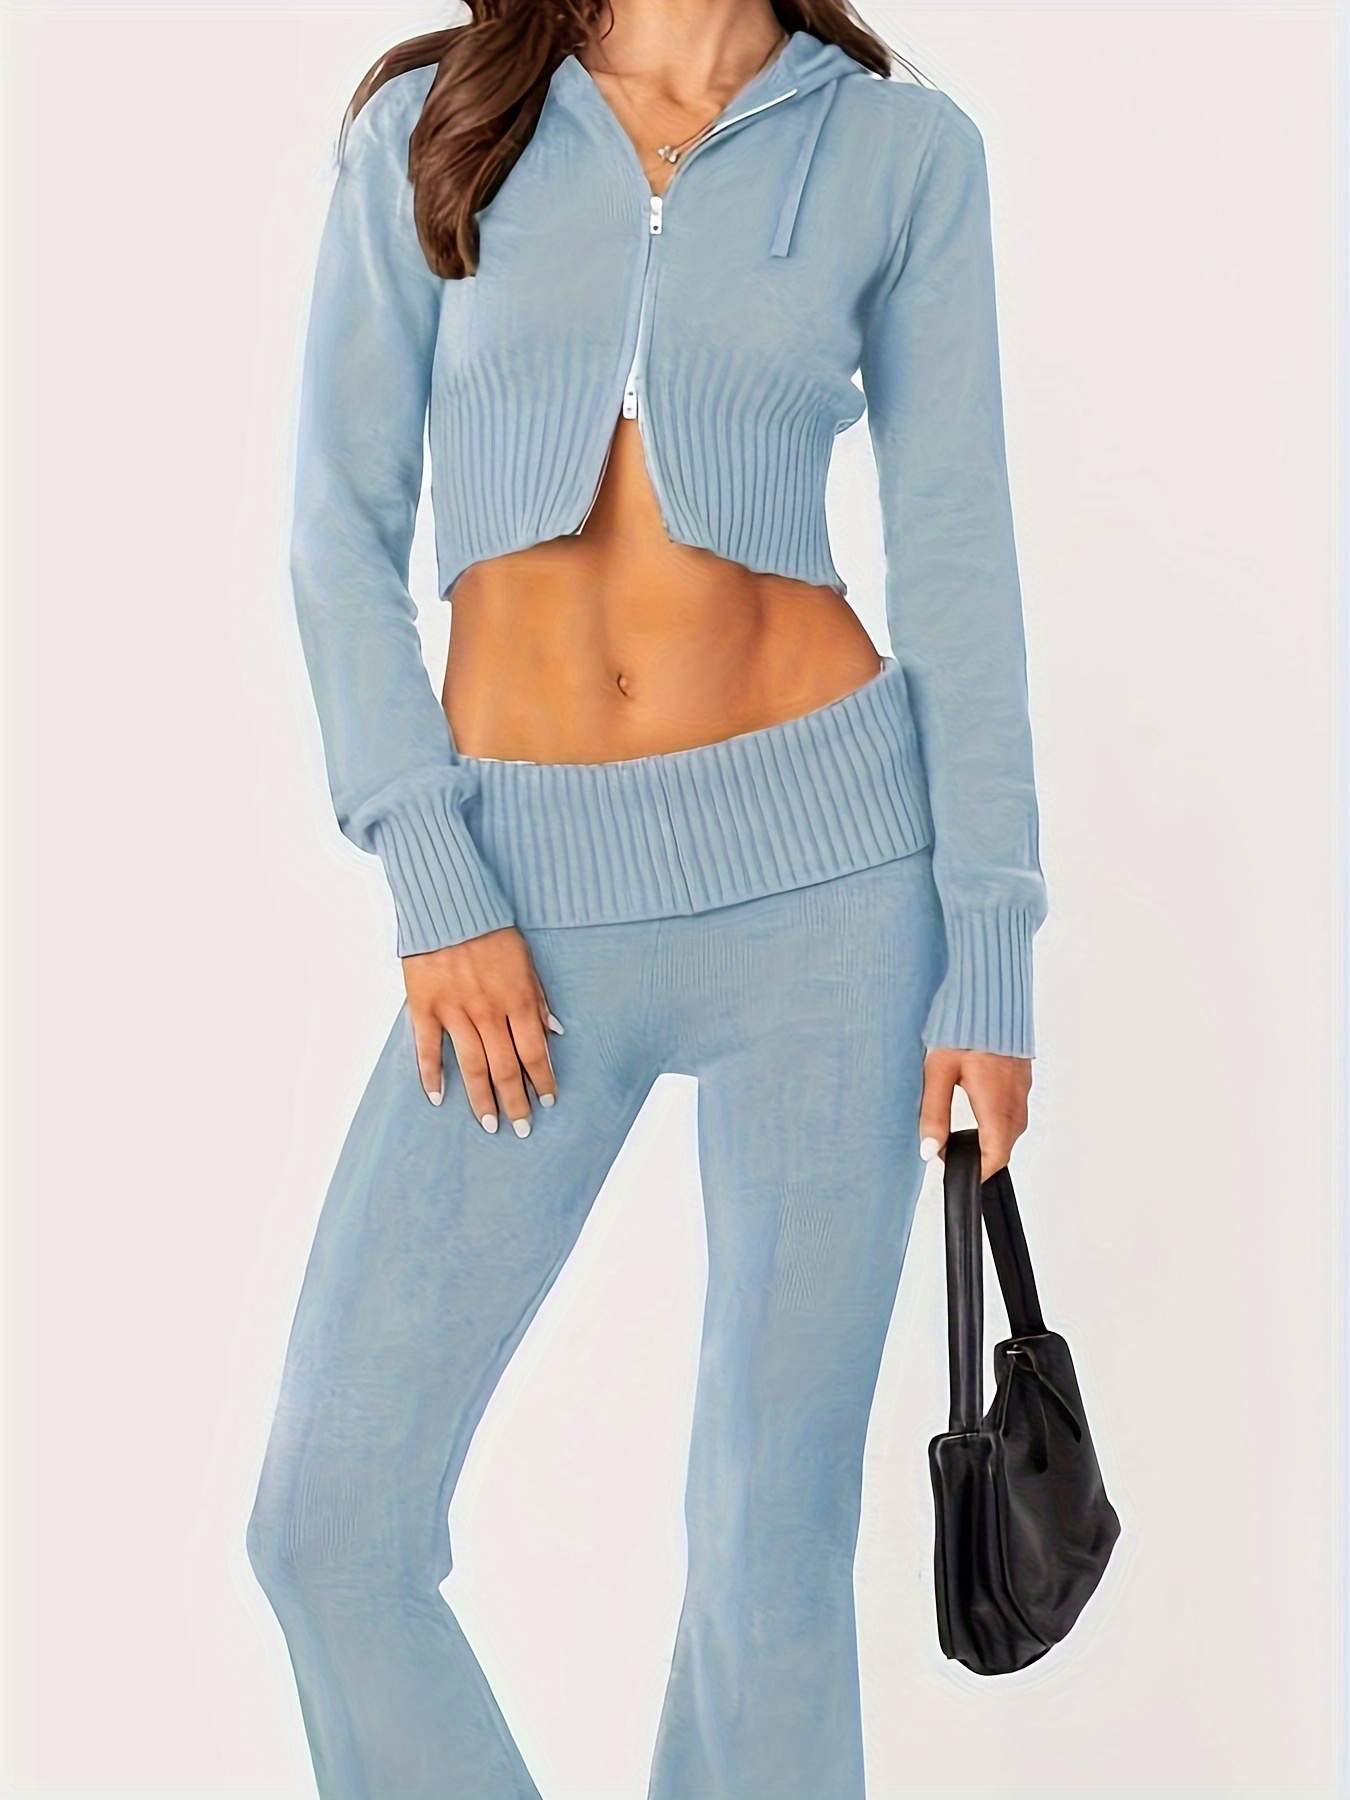  Women Knit 2 Piece Outfits Two-Way Zipper Hooded Tops